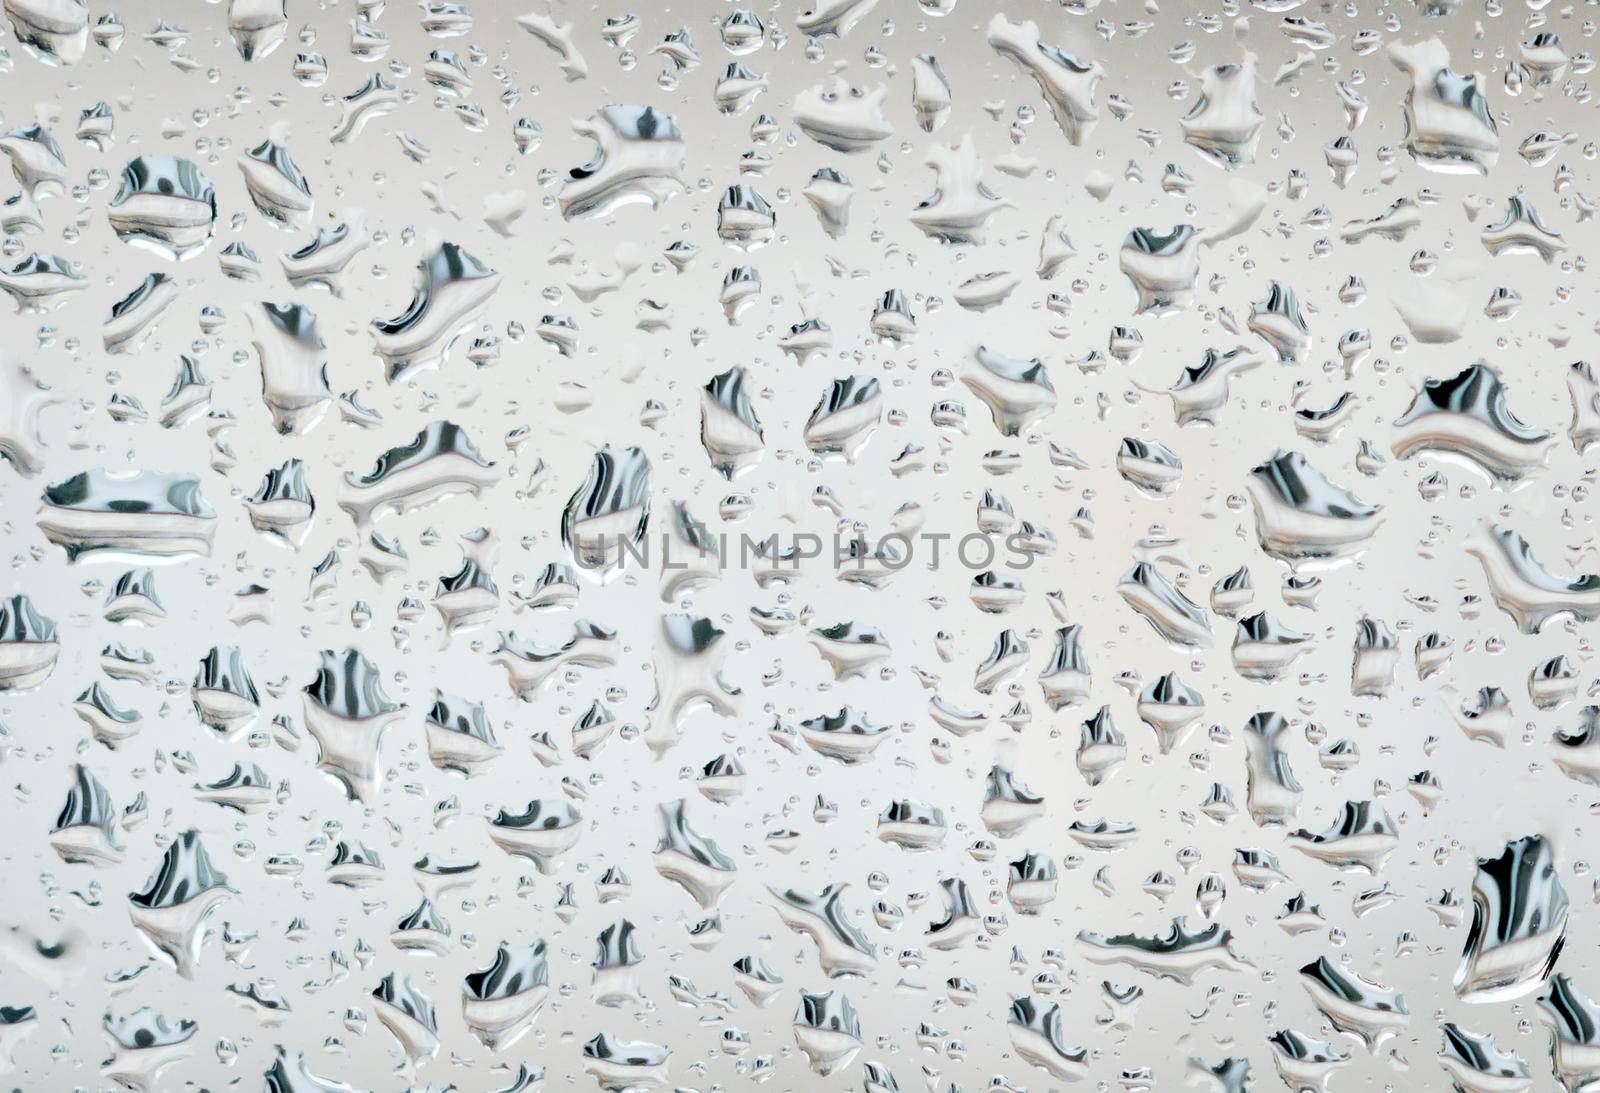 Rain droplets on glass with a white background. Seasonal and rain. Melancholy and mood.